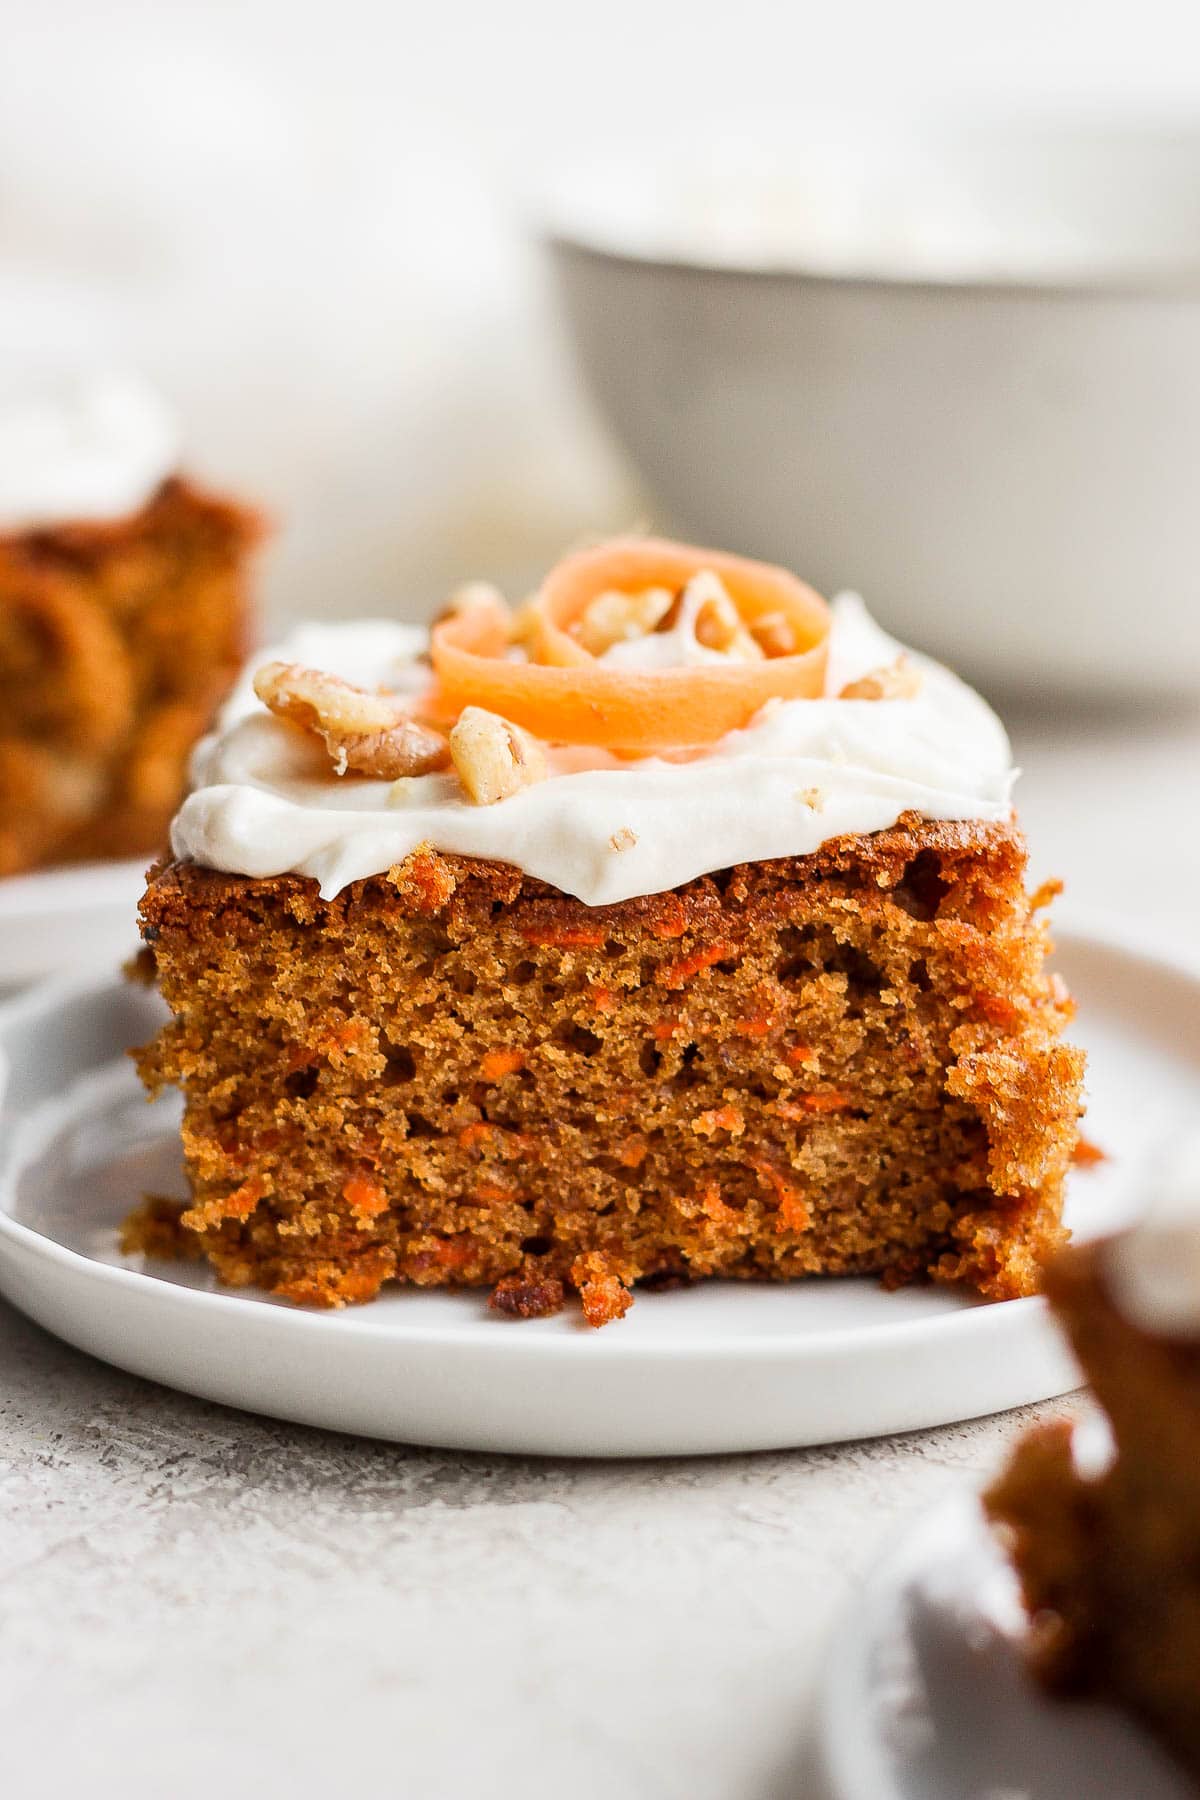 Slice of gluten free carrot cake on a plate with cream cheese frosting.